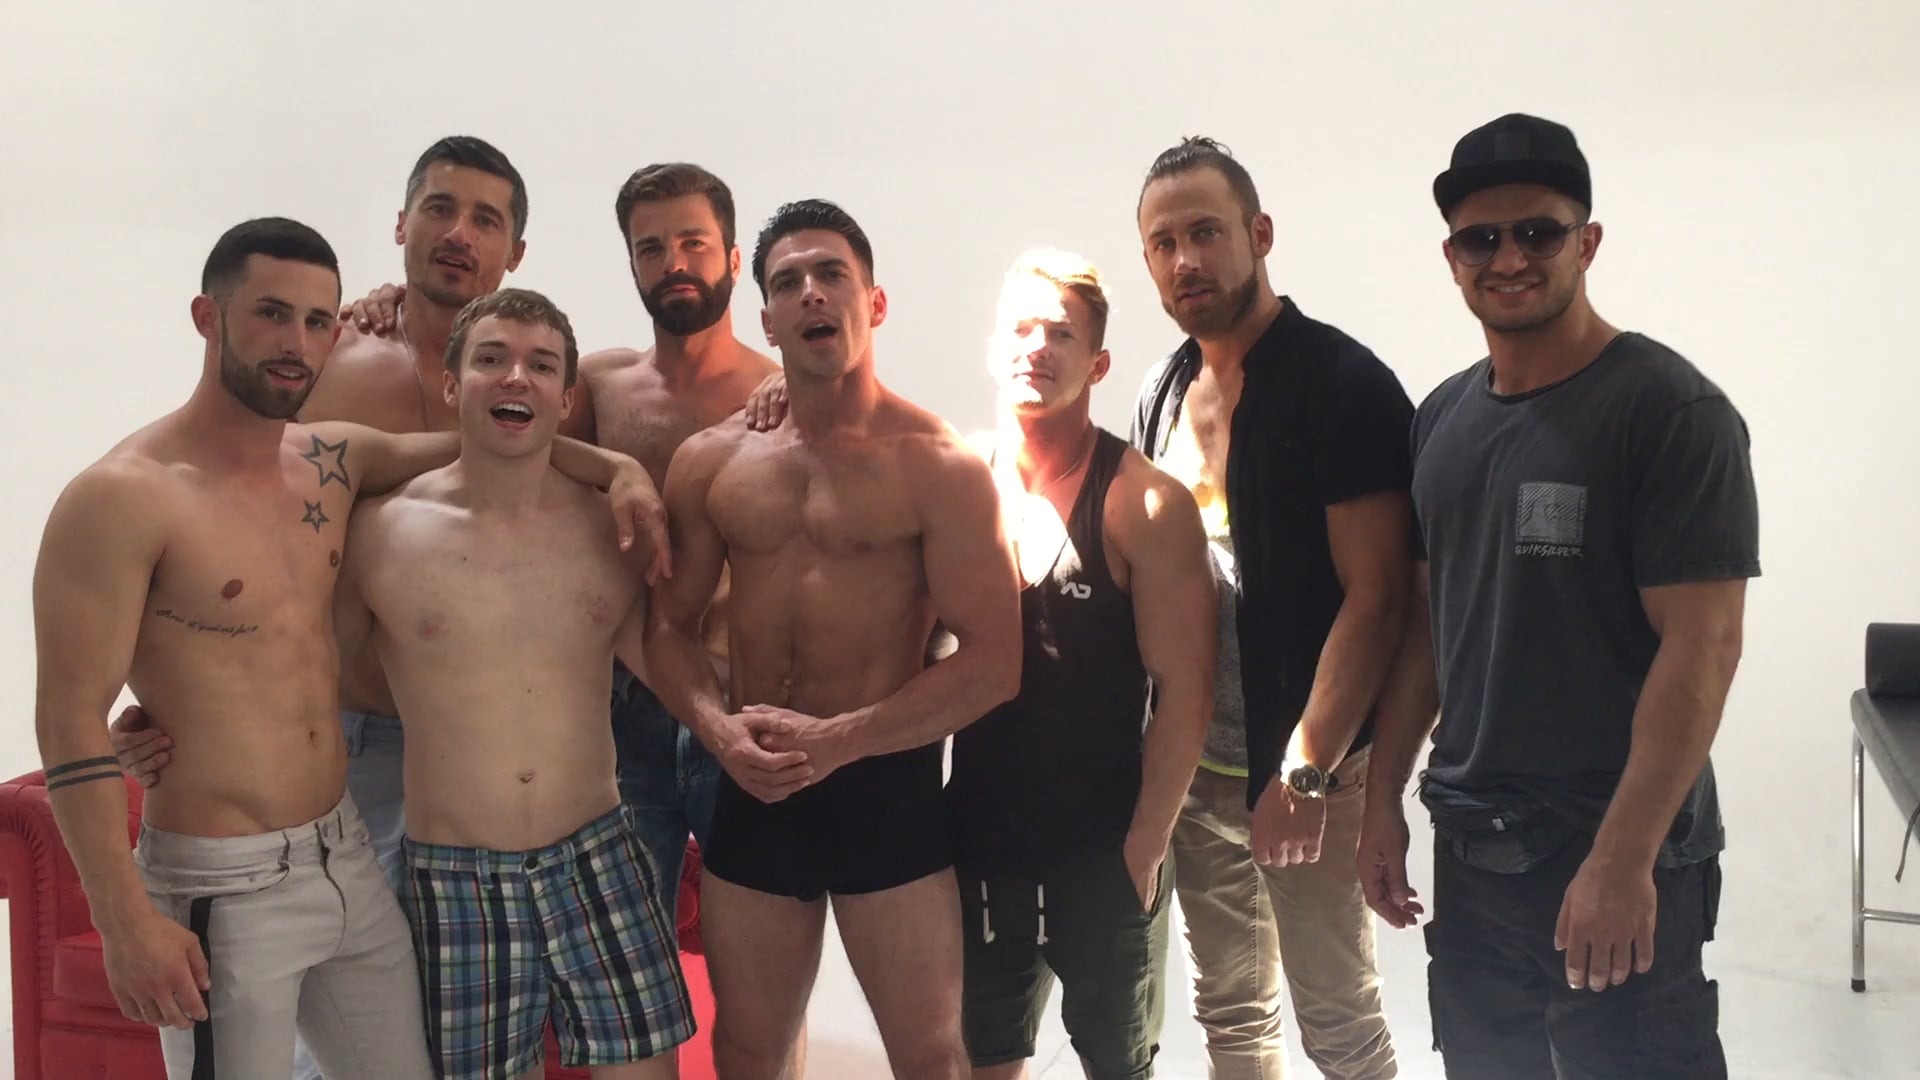 European Hottest Gay Porn Stars - Queer Me Now 10 Years Anniversary on Vimeo